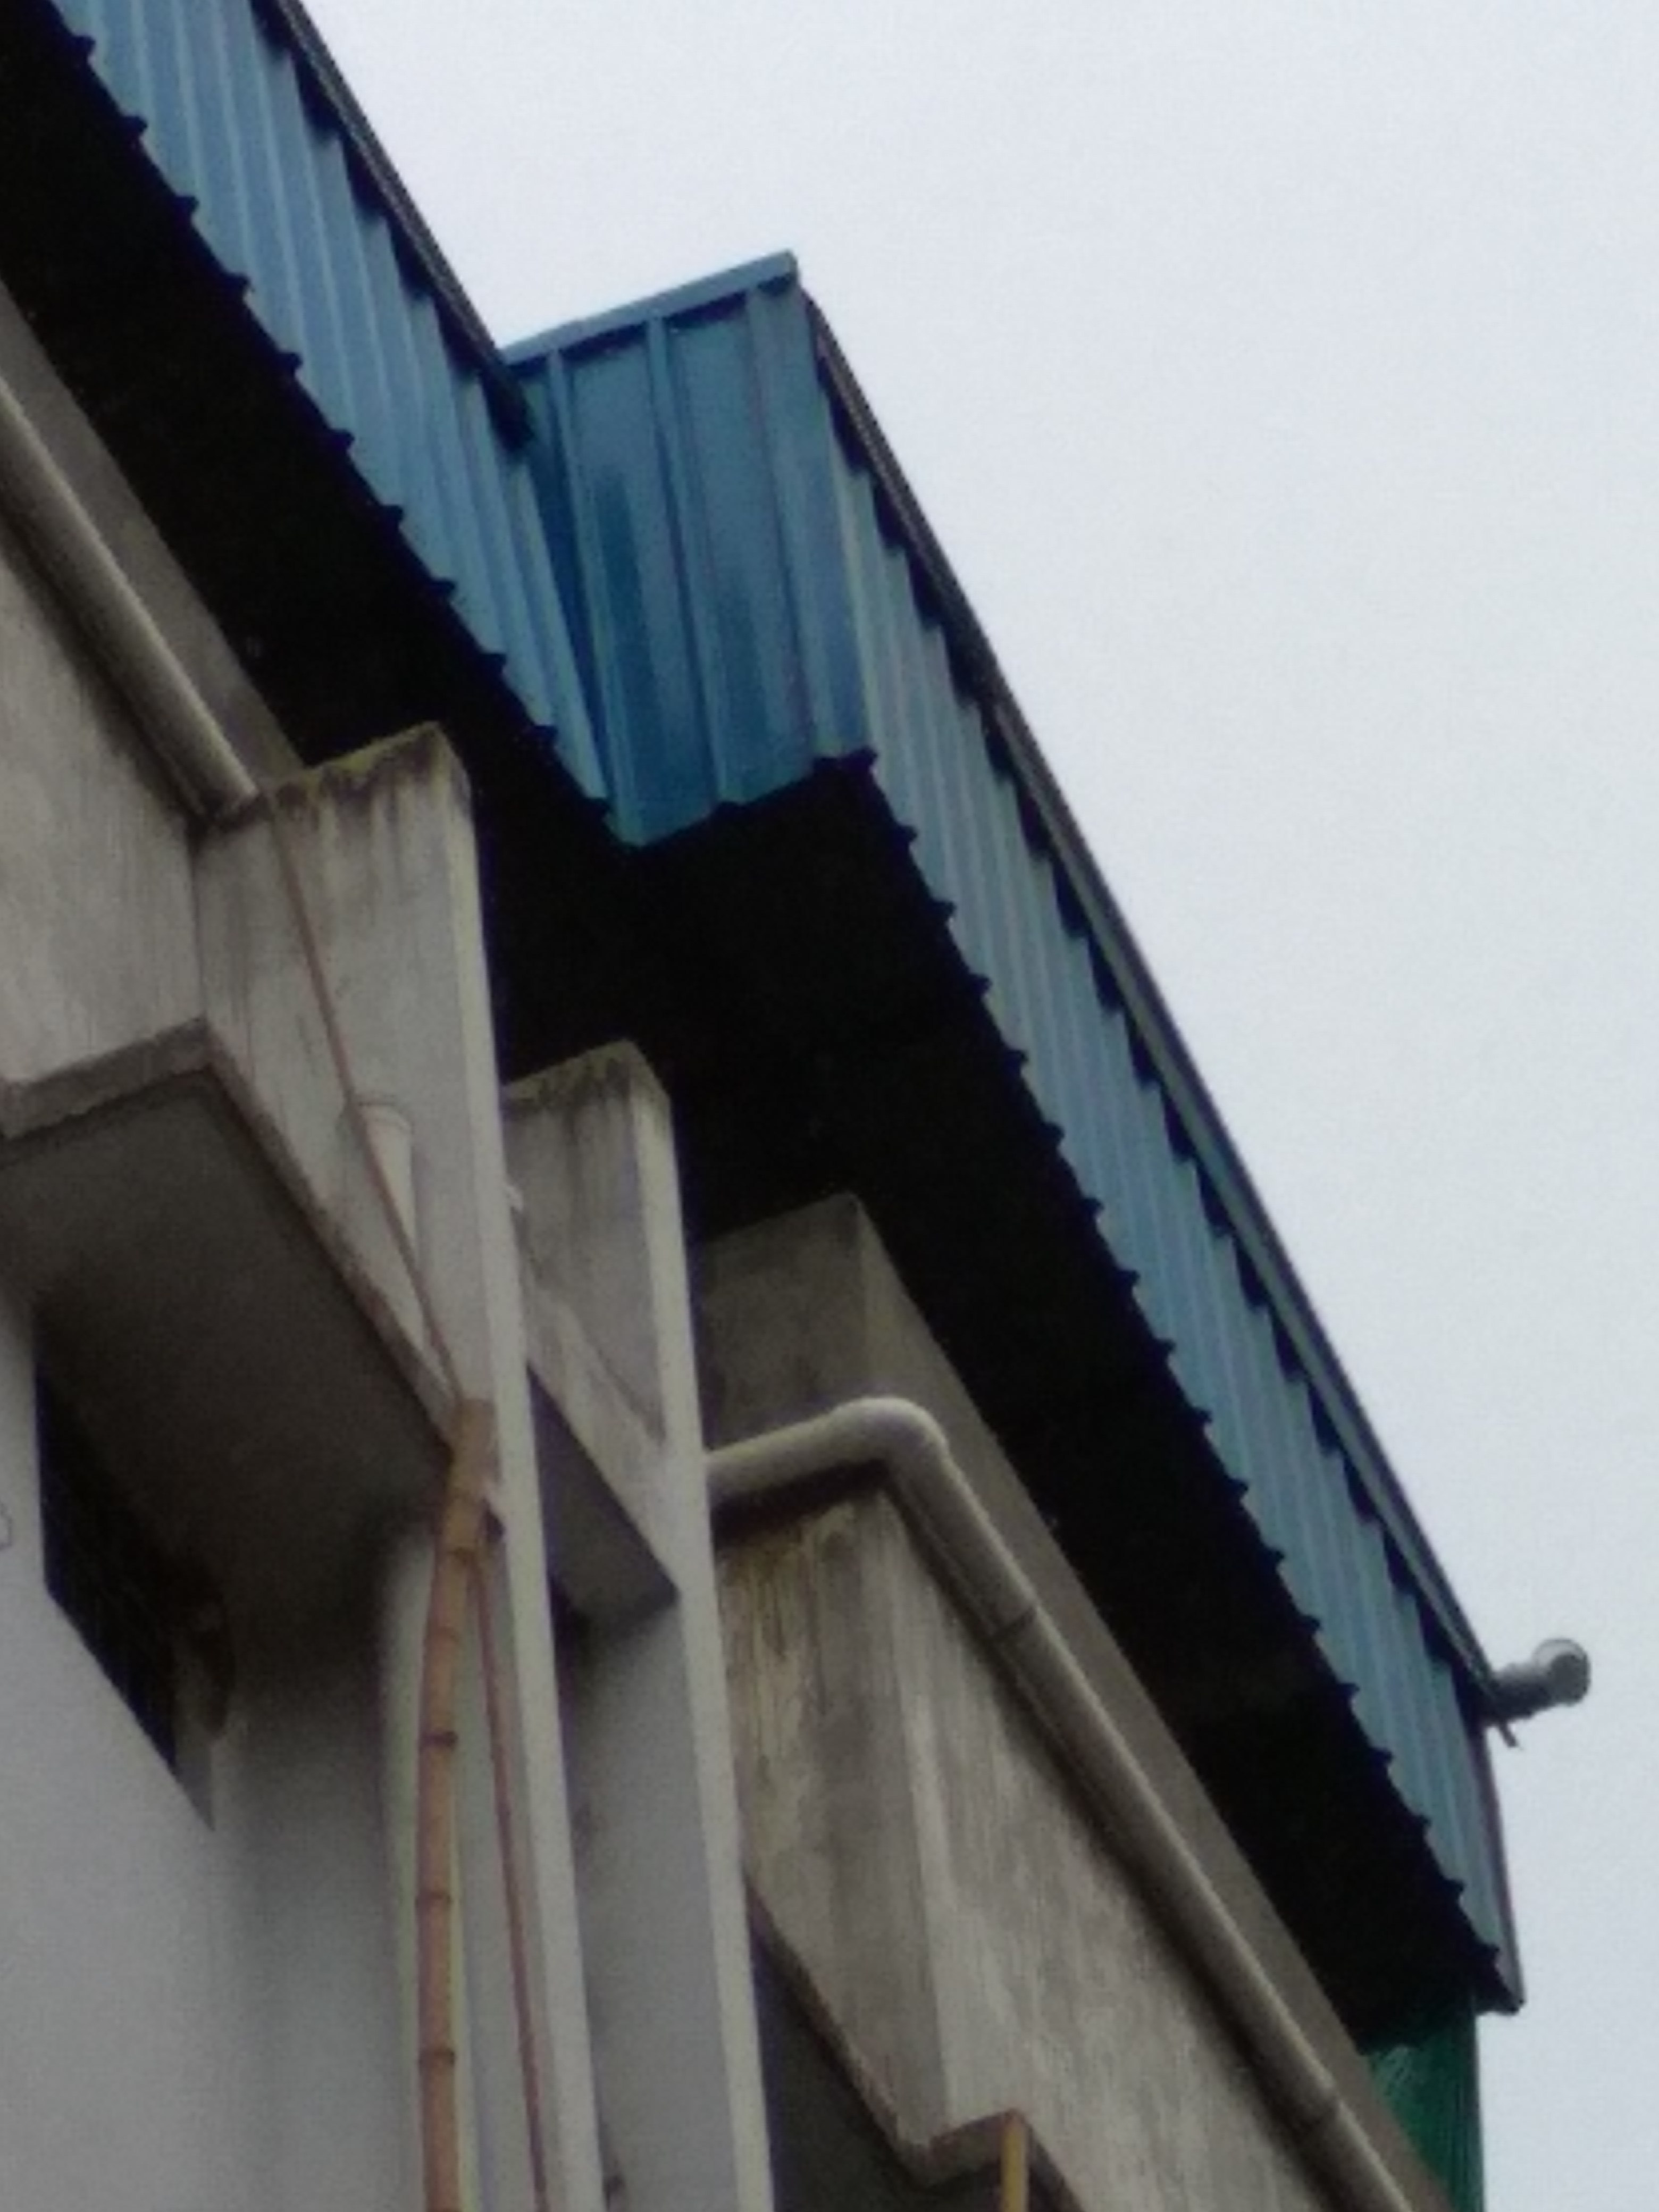 Roofing Structure Fabrication Services